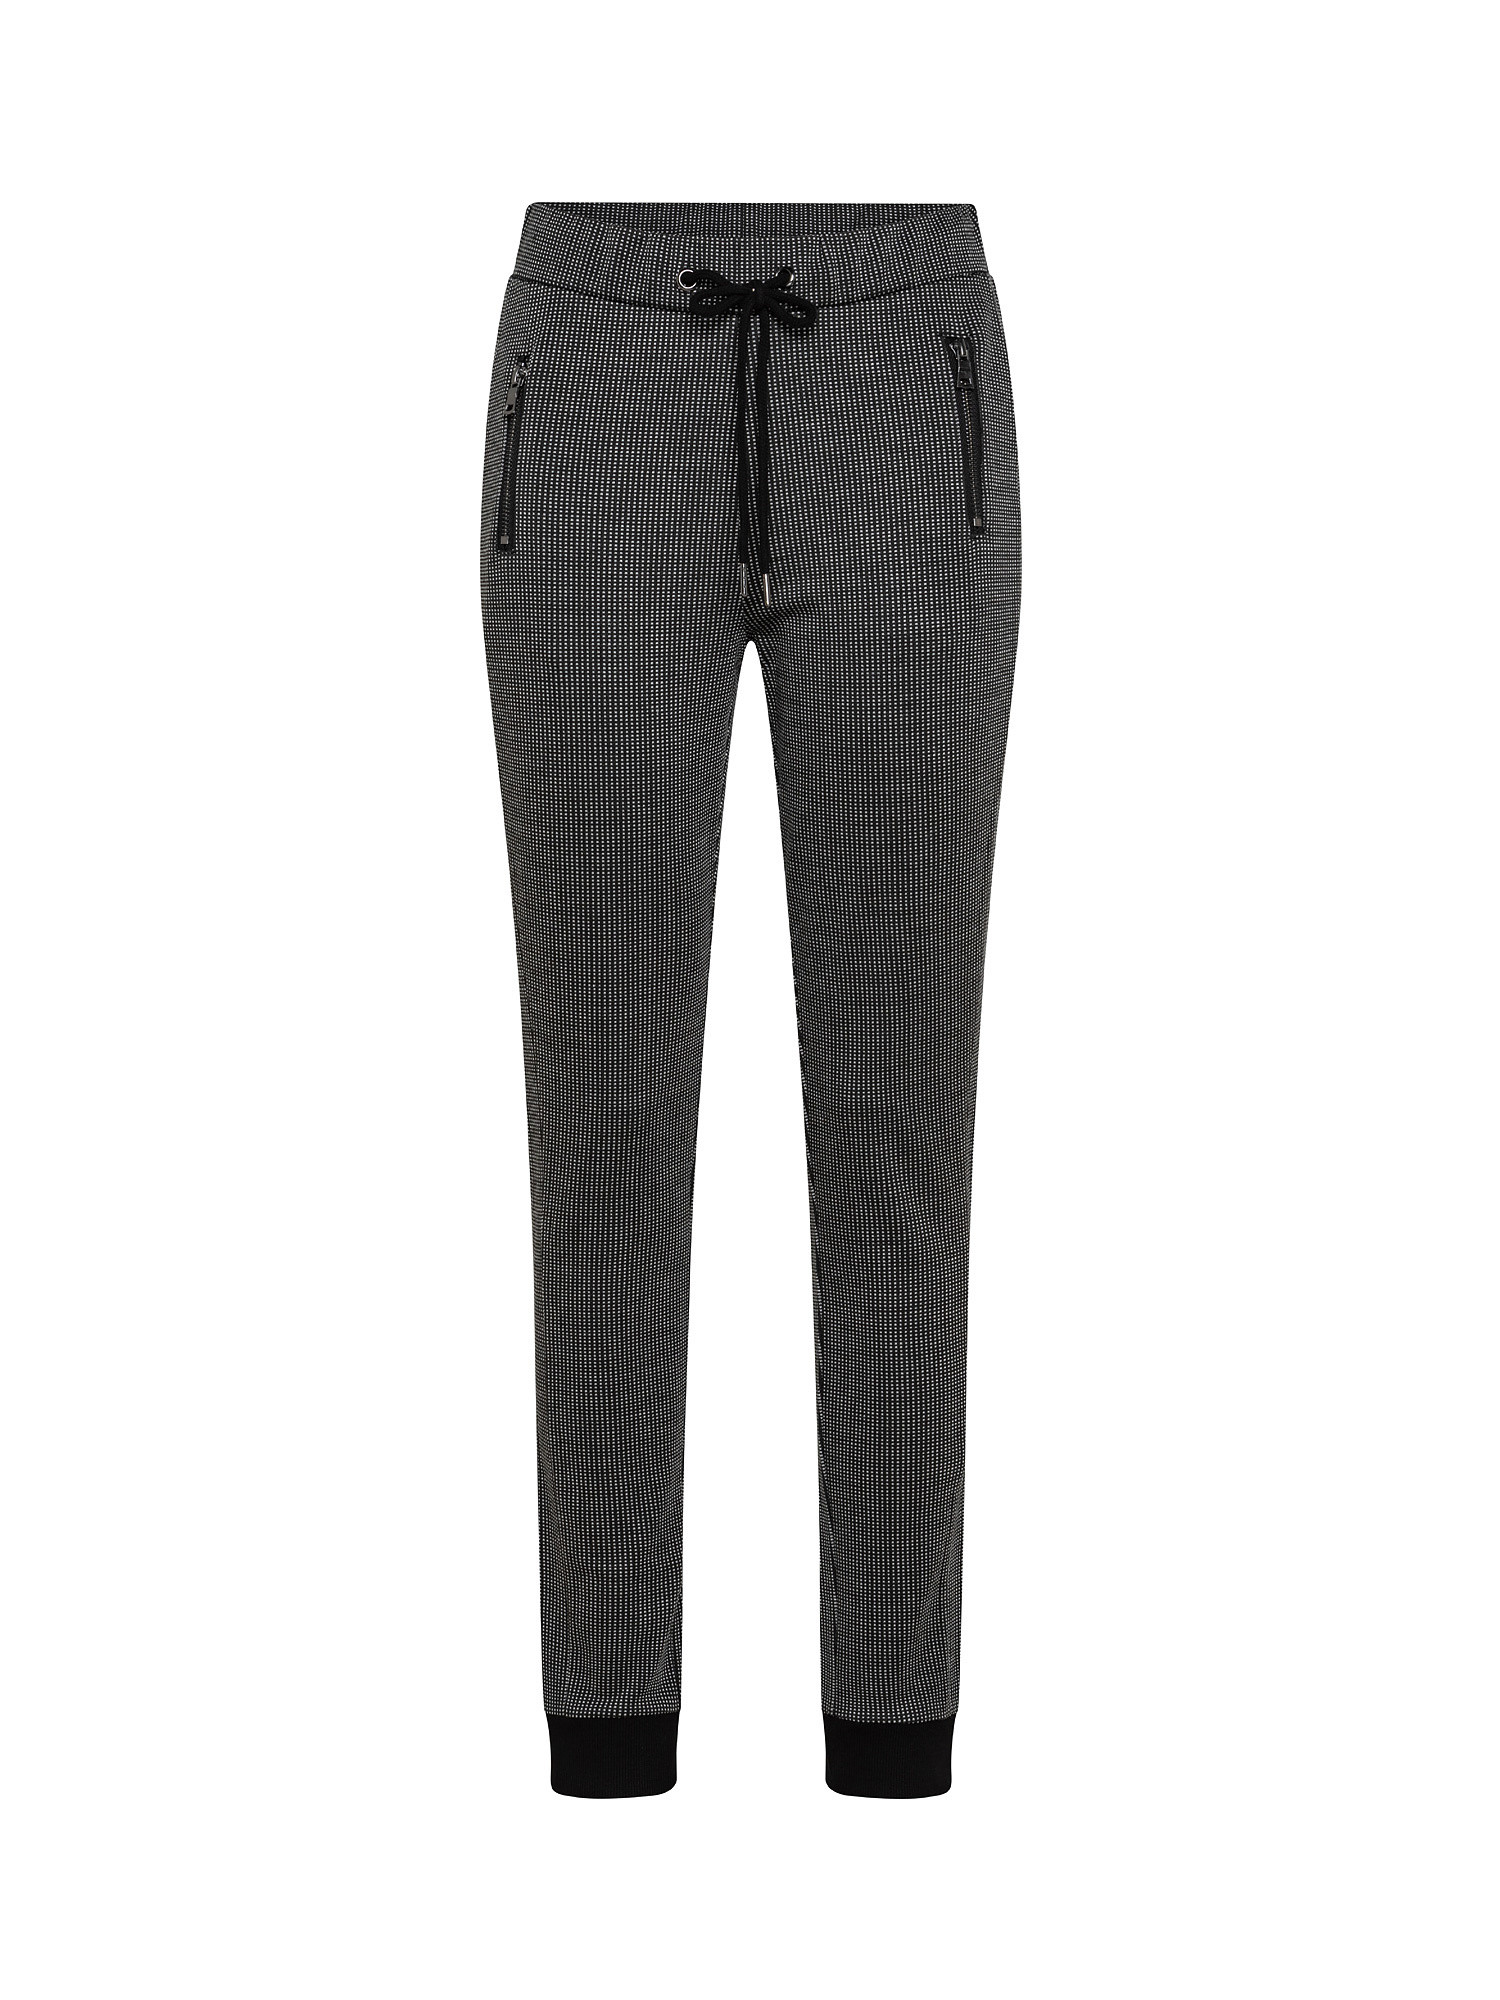 Trousers with pockets, Grey, large image number 0